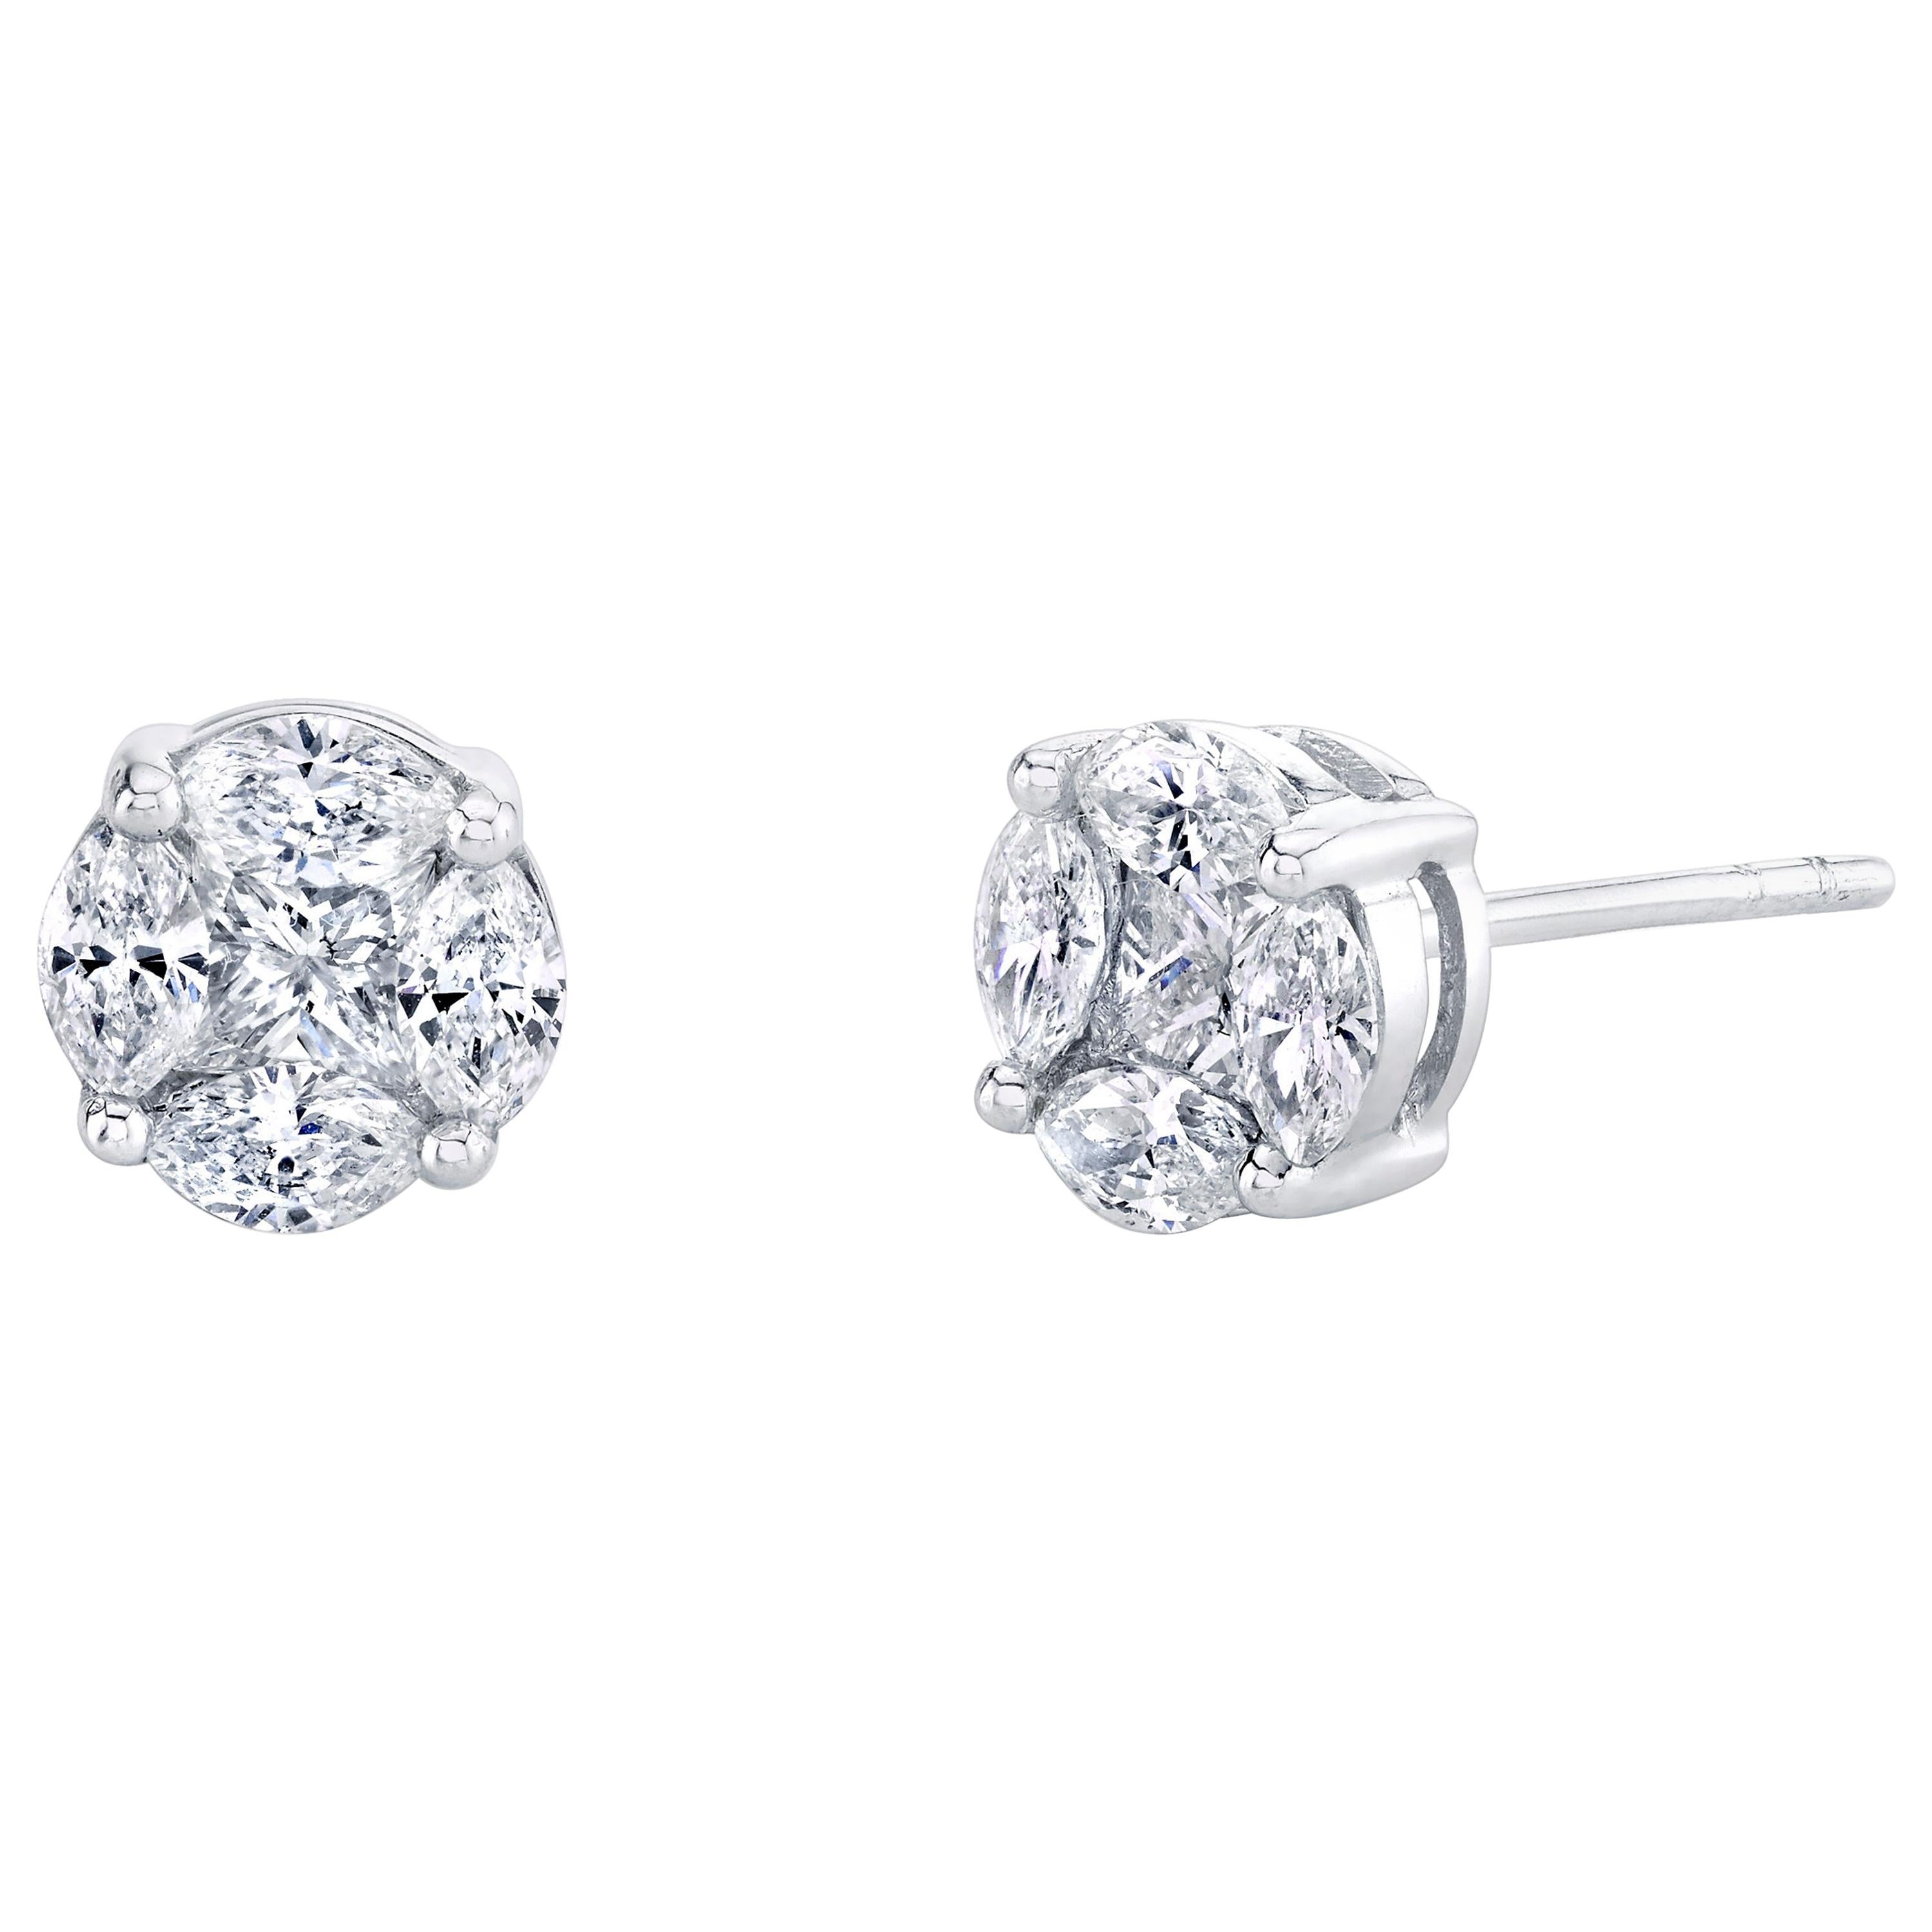 Princess and Marquise Diamond Illusion Stud Earrings in 18k White Gold